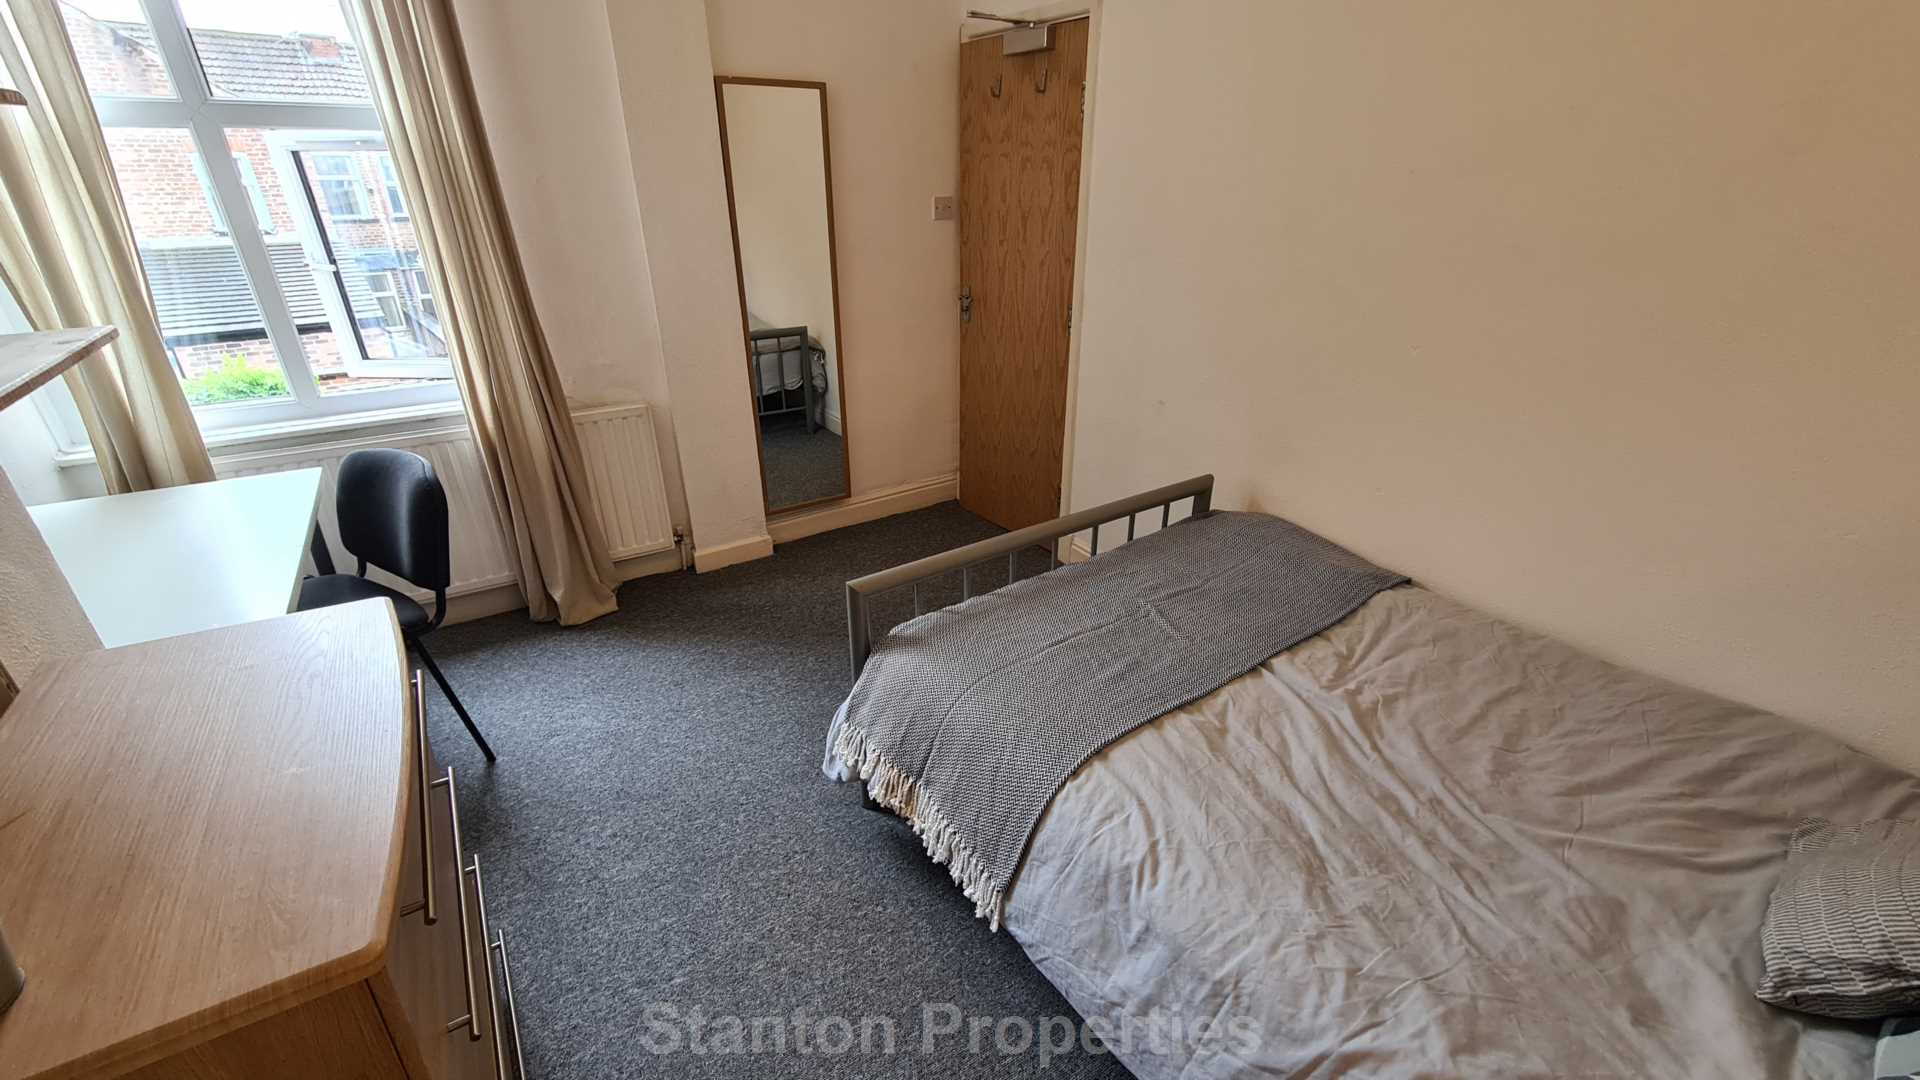 £130 pppw, See Video Tour, Mabfield Road, Fallowfield, Image 27